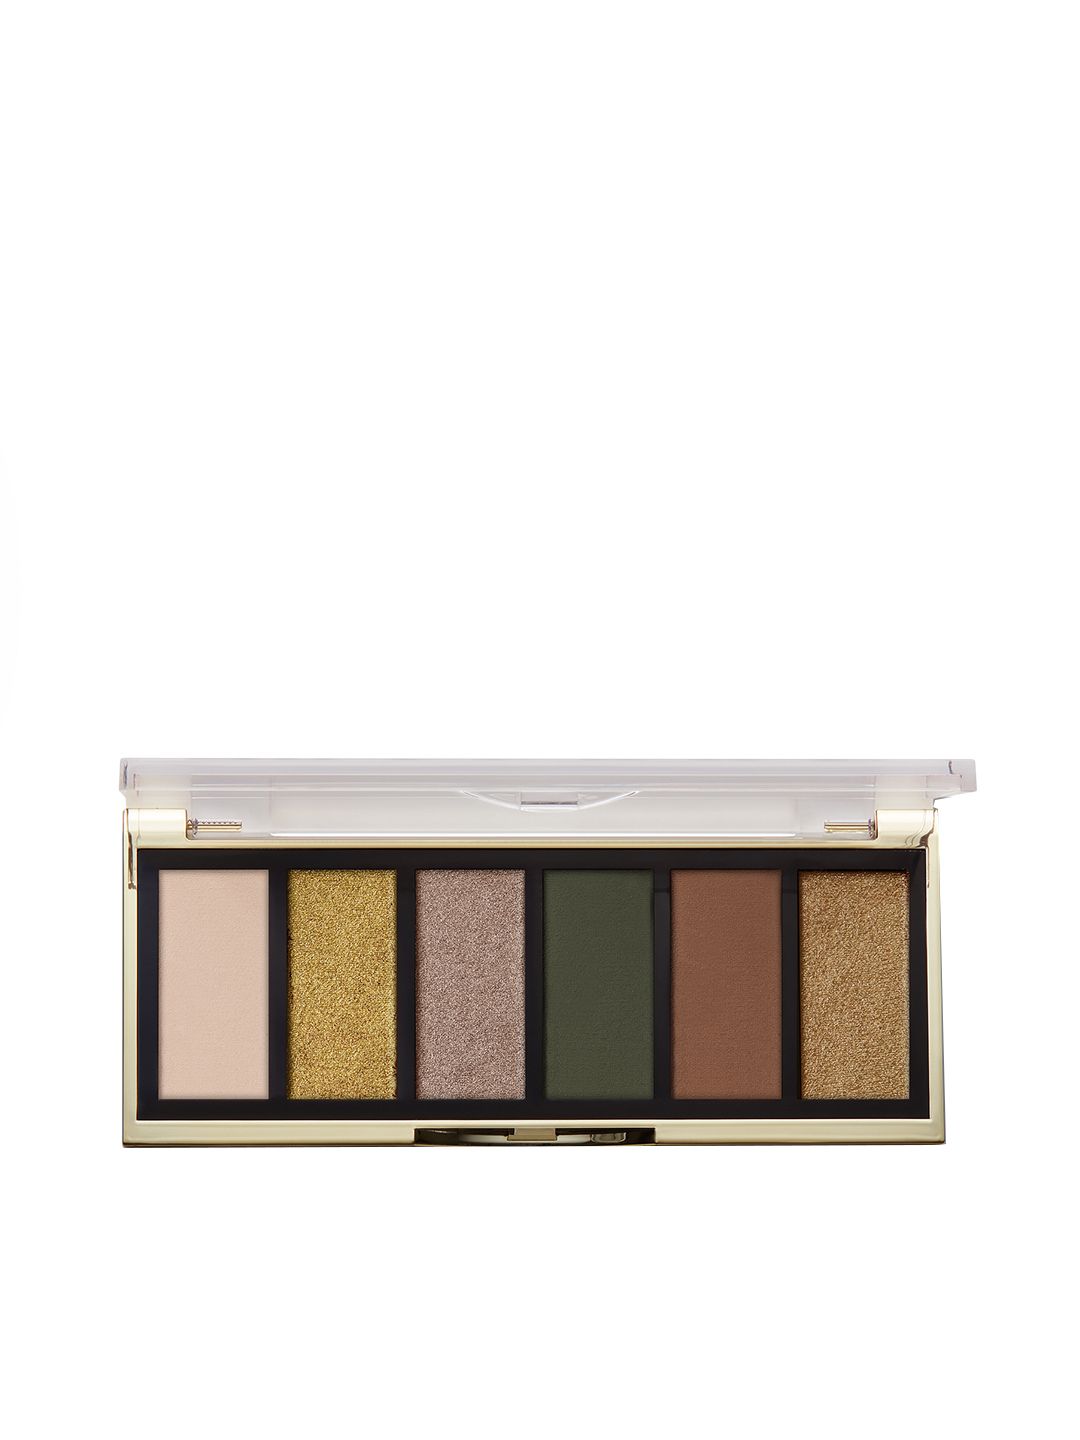 MILANI Most Wanted Eyeshadow Palette - Outlaw Olive 120 Price in India